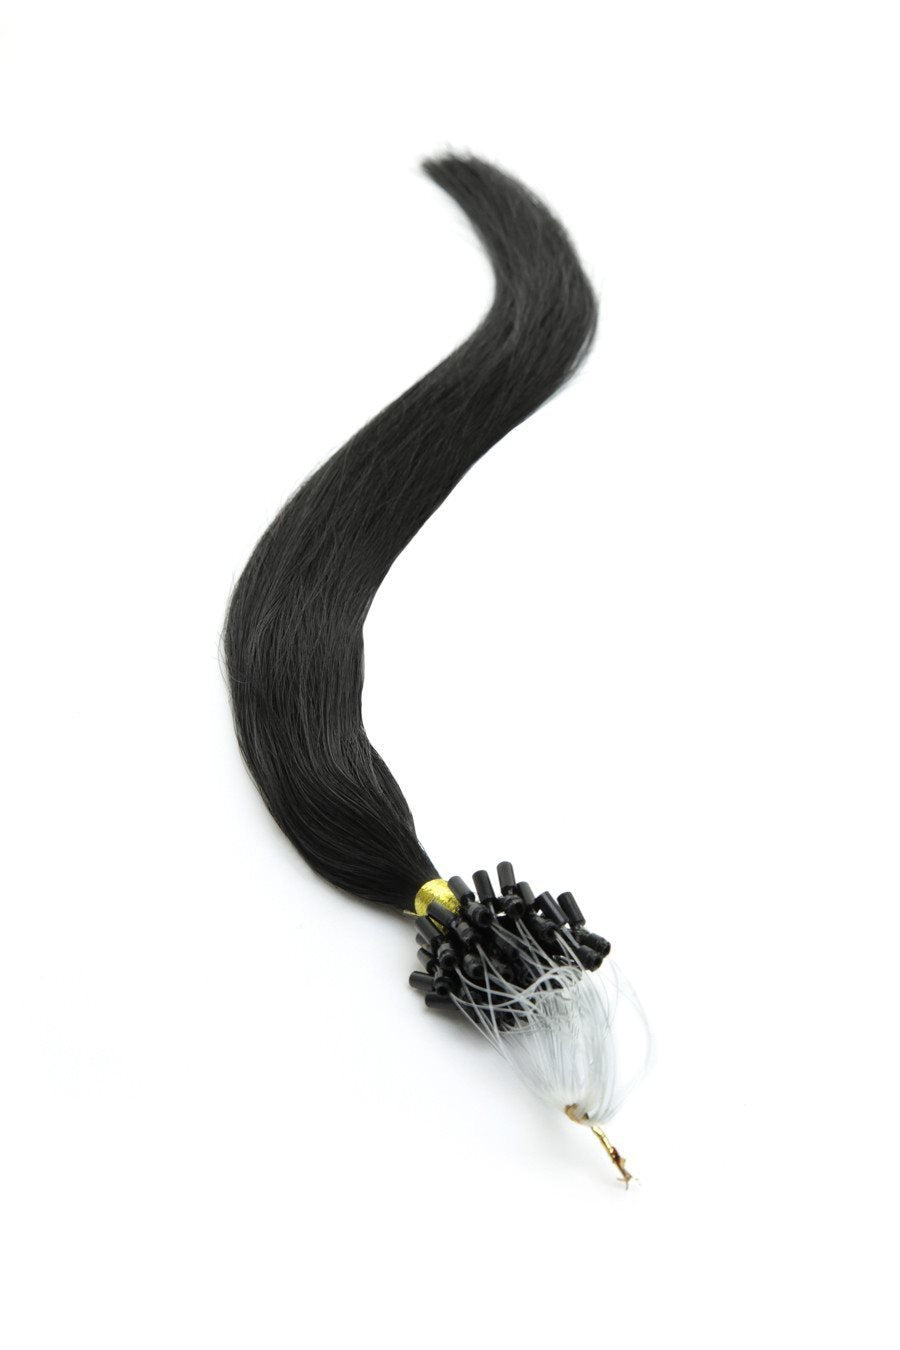 Micro Ring Hair Extensions | 18 inch Jet Black (1) - Beauty Hair Products LtdHair Extensions